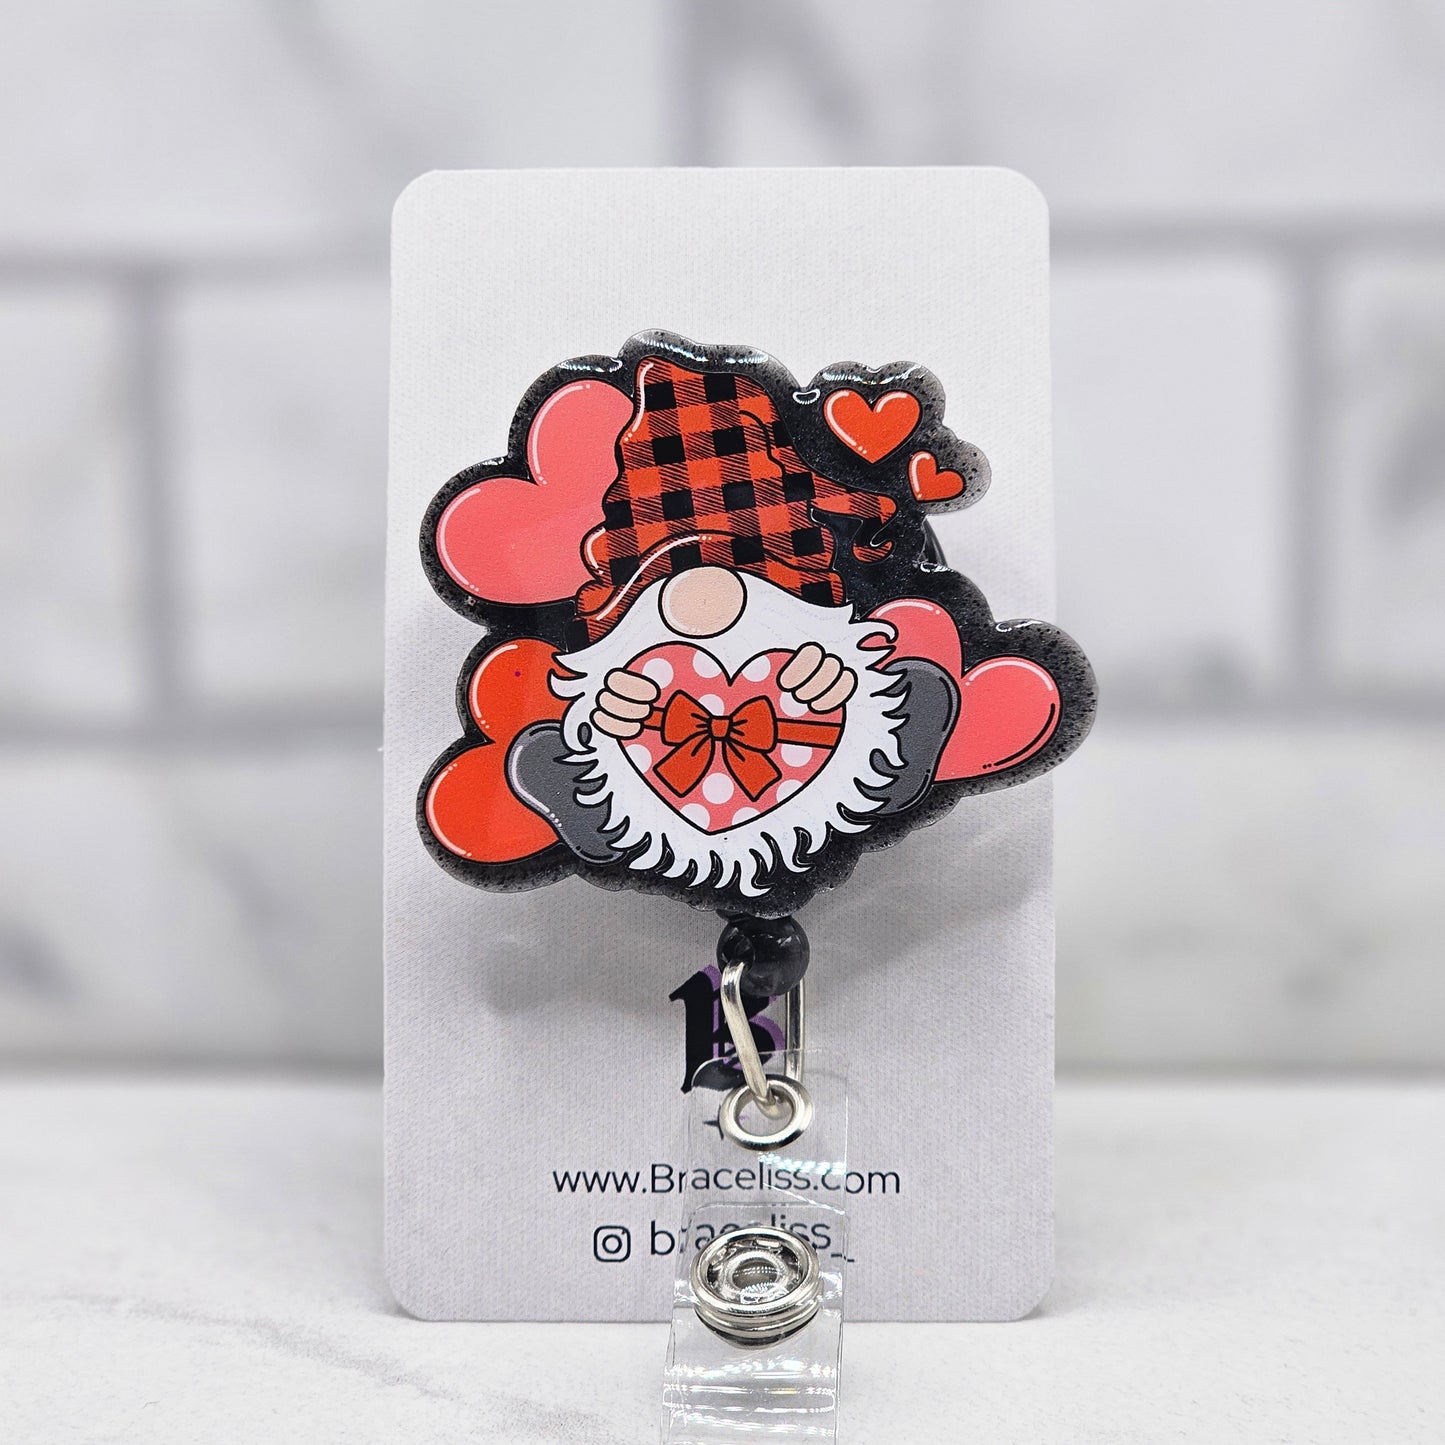 2" Red & Black Valentine Gnome Badge Reel | Retractable Medical ID Tag | Gift For Nurses, Teachers, Medical Assistants | Fun Badge Holder